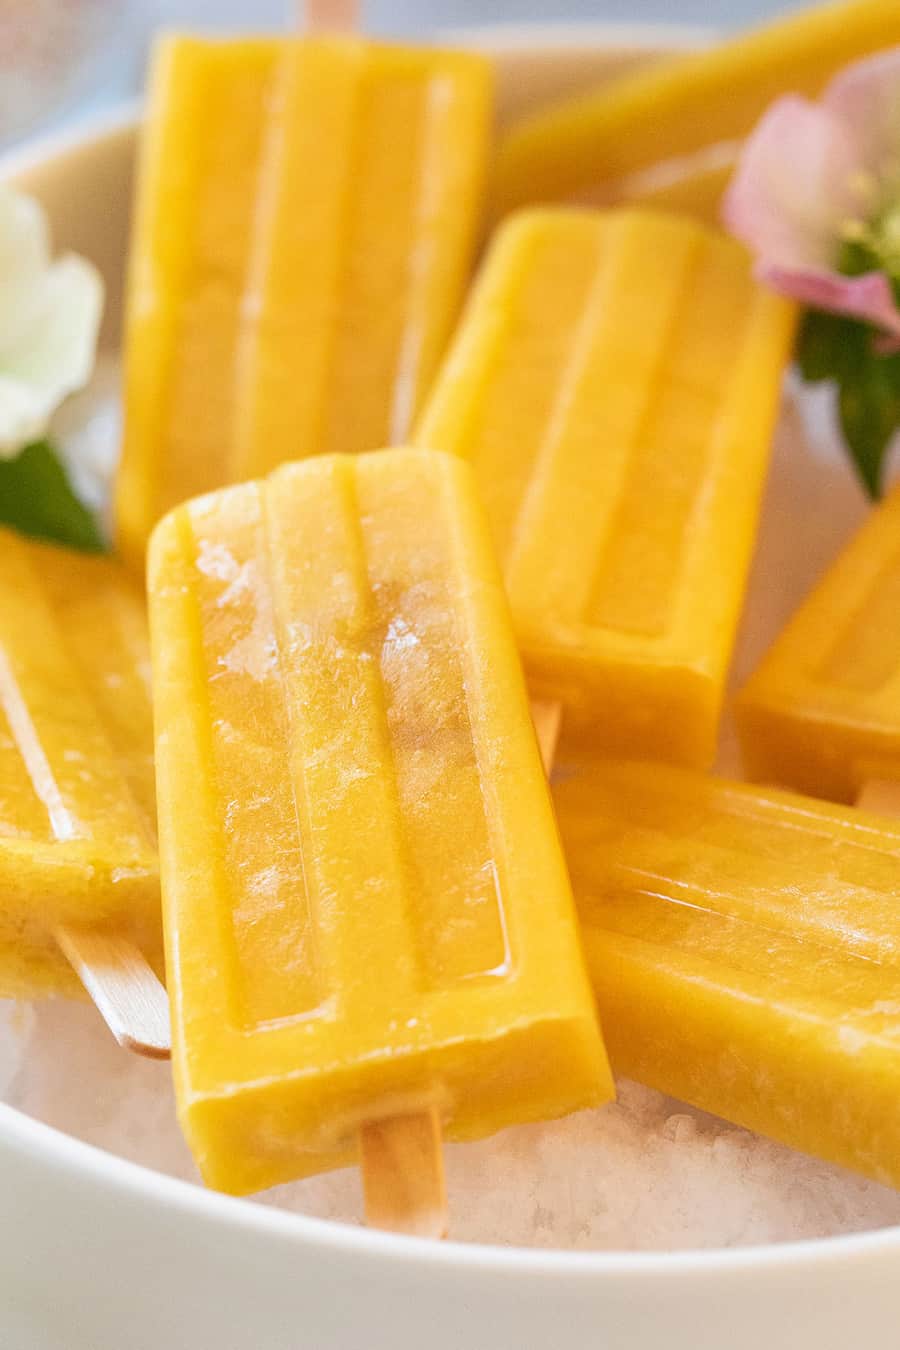 Diy Popsicle Molds · How To Make An Ice Lolly · Recipe by ZanyDays